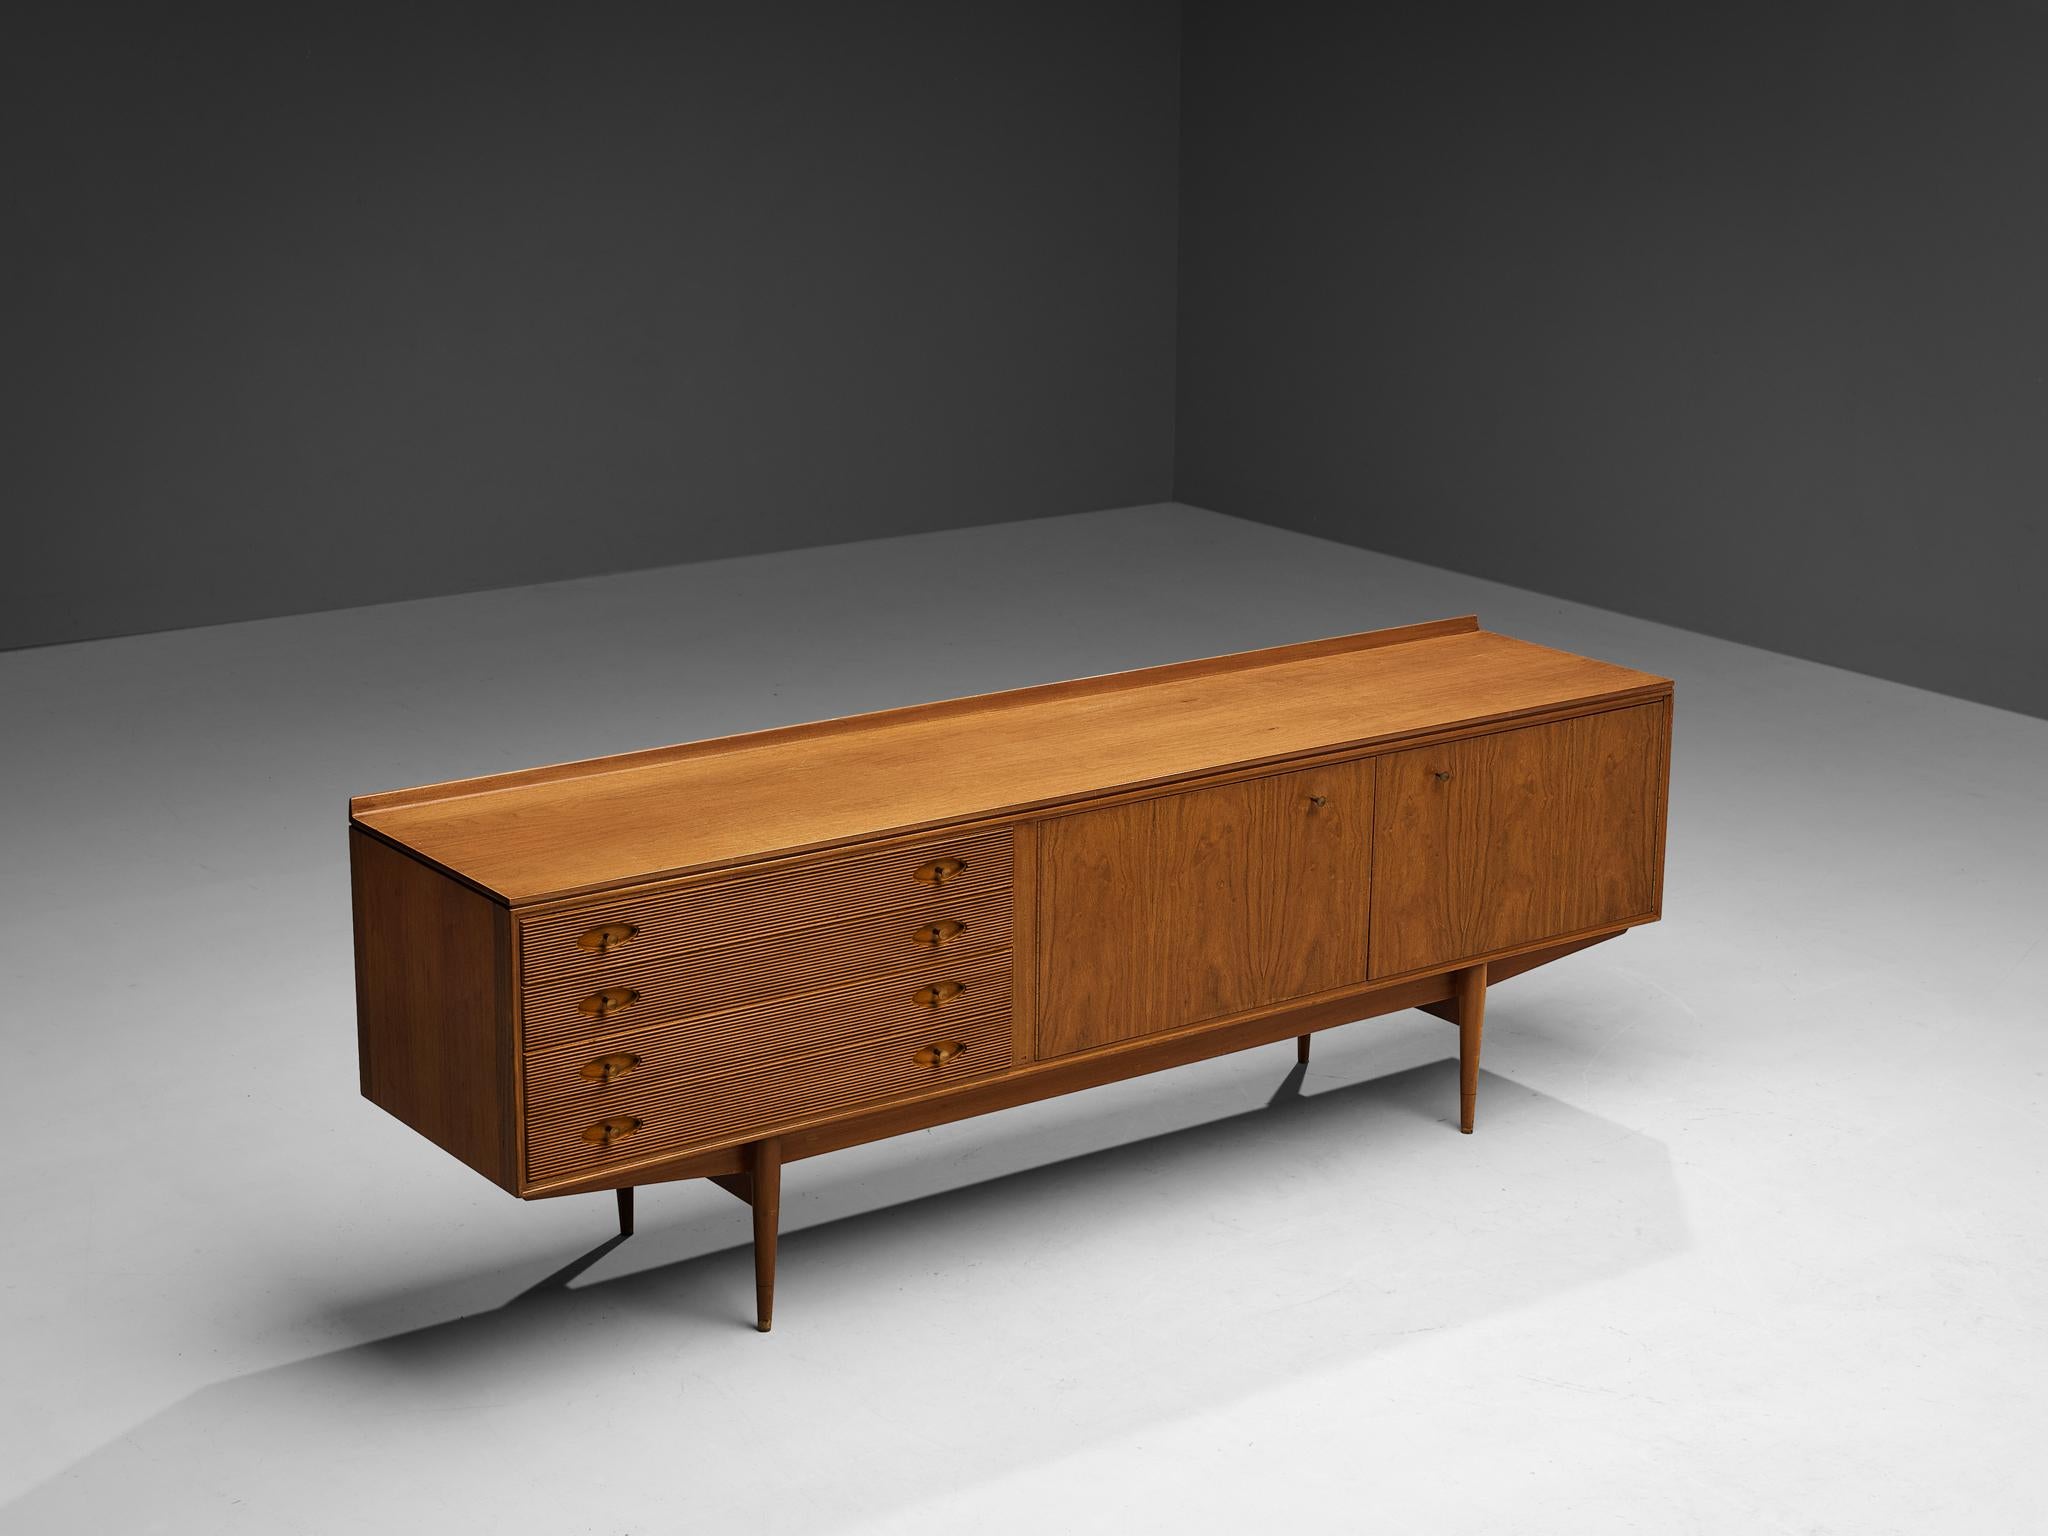 British Robert Heritage for Archie Shine ‘Hamilton’ Sideboard in Walnut and Brass